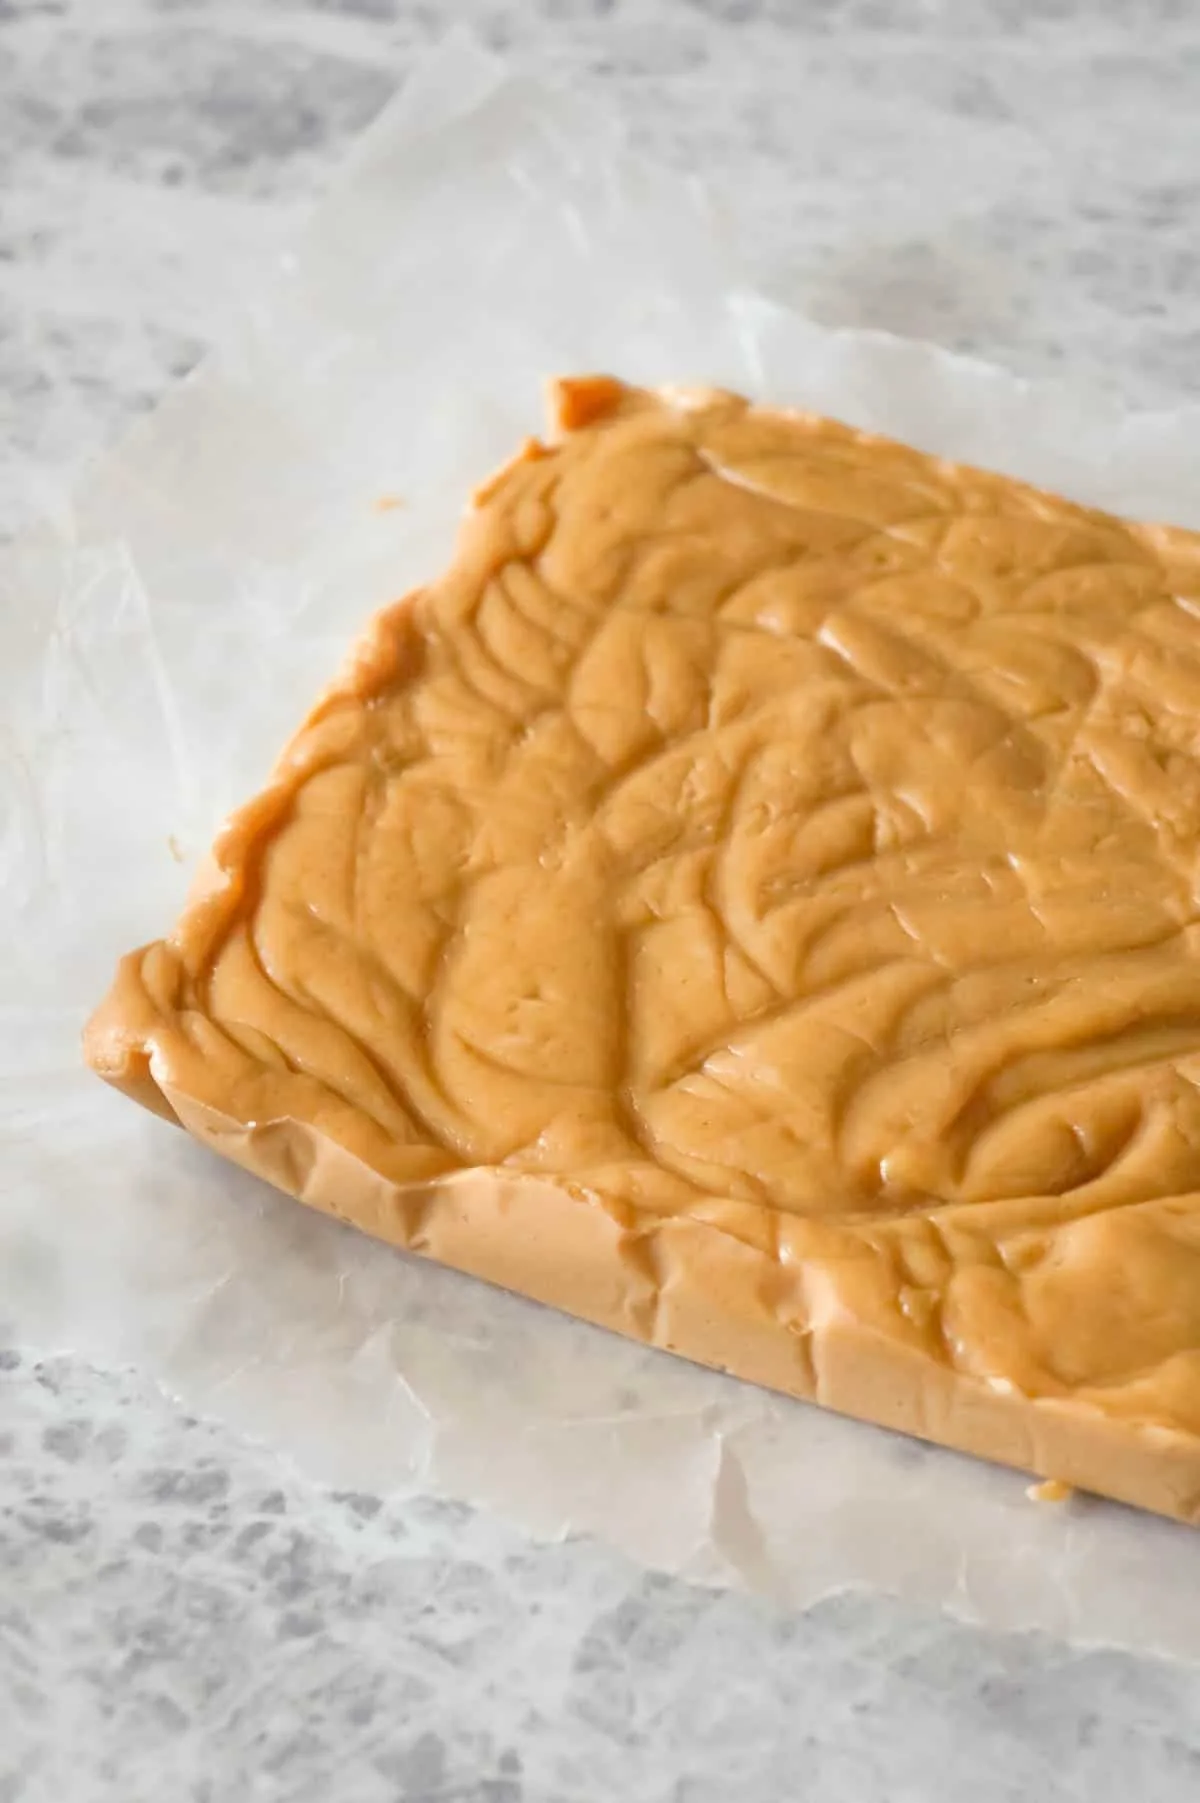 Easy Peanut Butter Fudge is an easy three ingredient microwave fudge recipe made with vanilla frosting, Reese's peanut butter baking chips and smooth peanut butter.